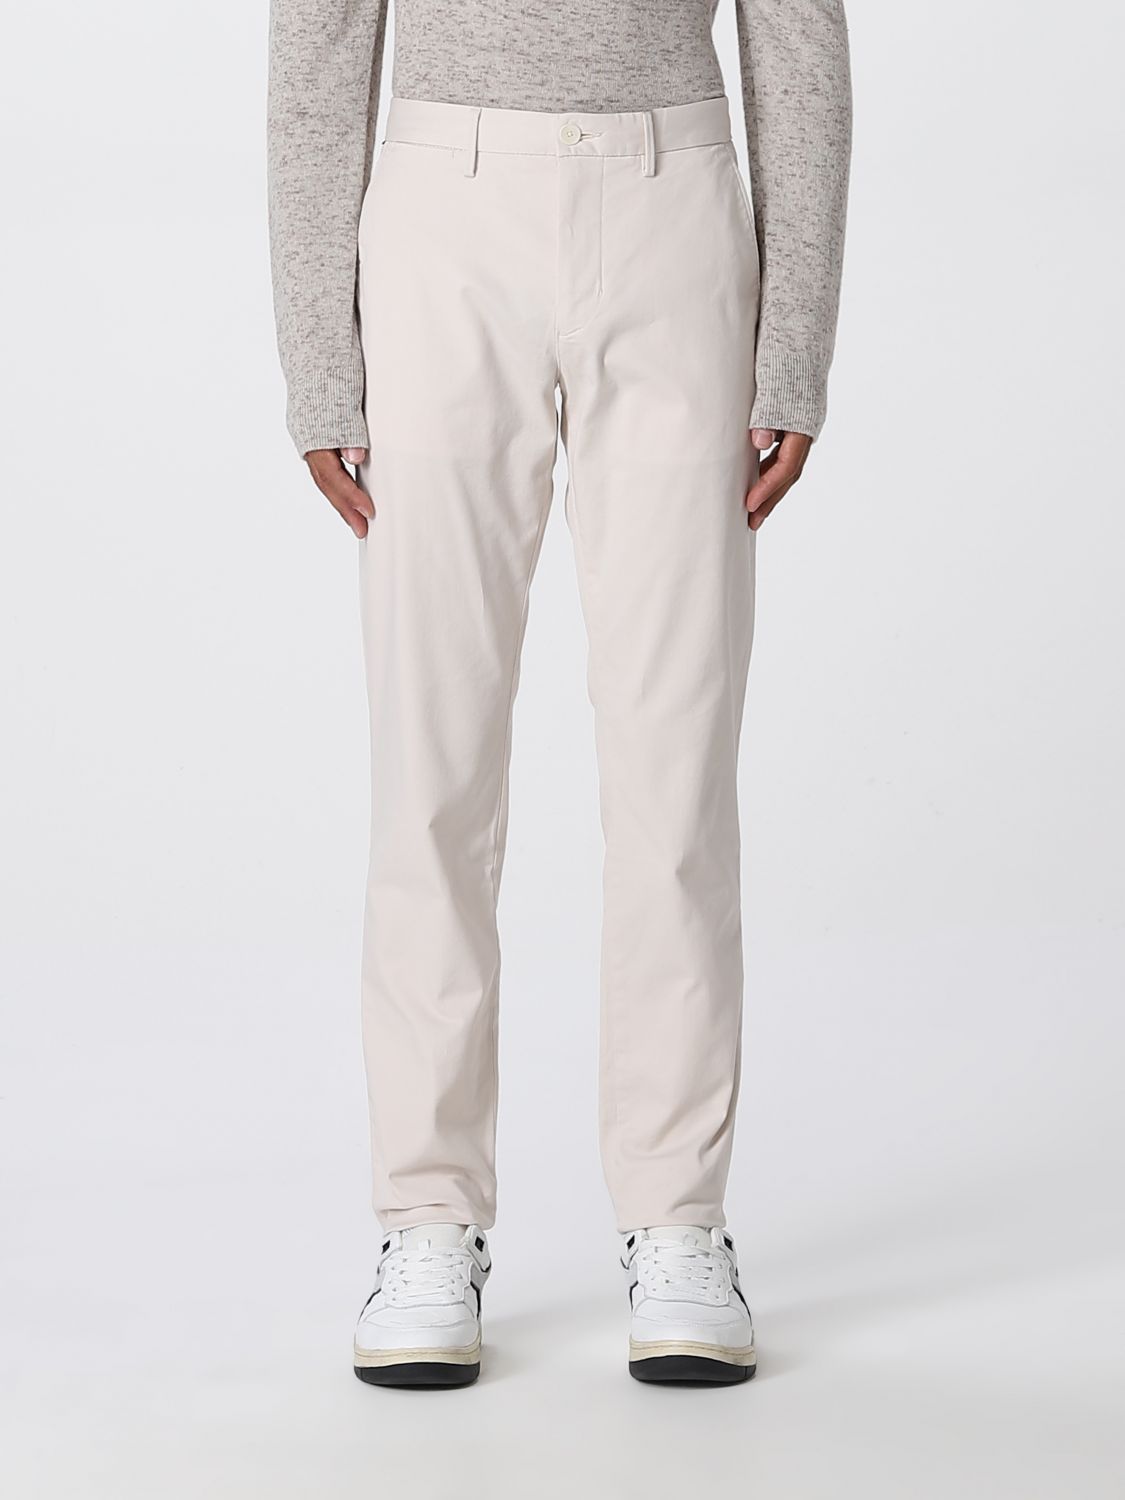 TOMMY HILFIGER: organic cotton blend pants - White | Hilfiger pants MW0MW25601 online on GIGLIO.COM